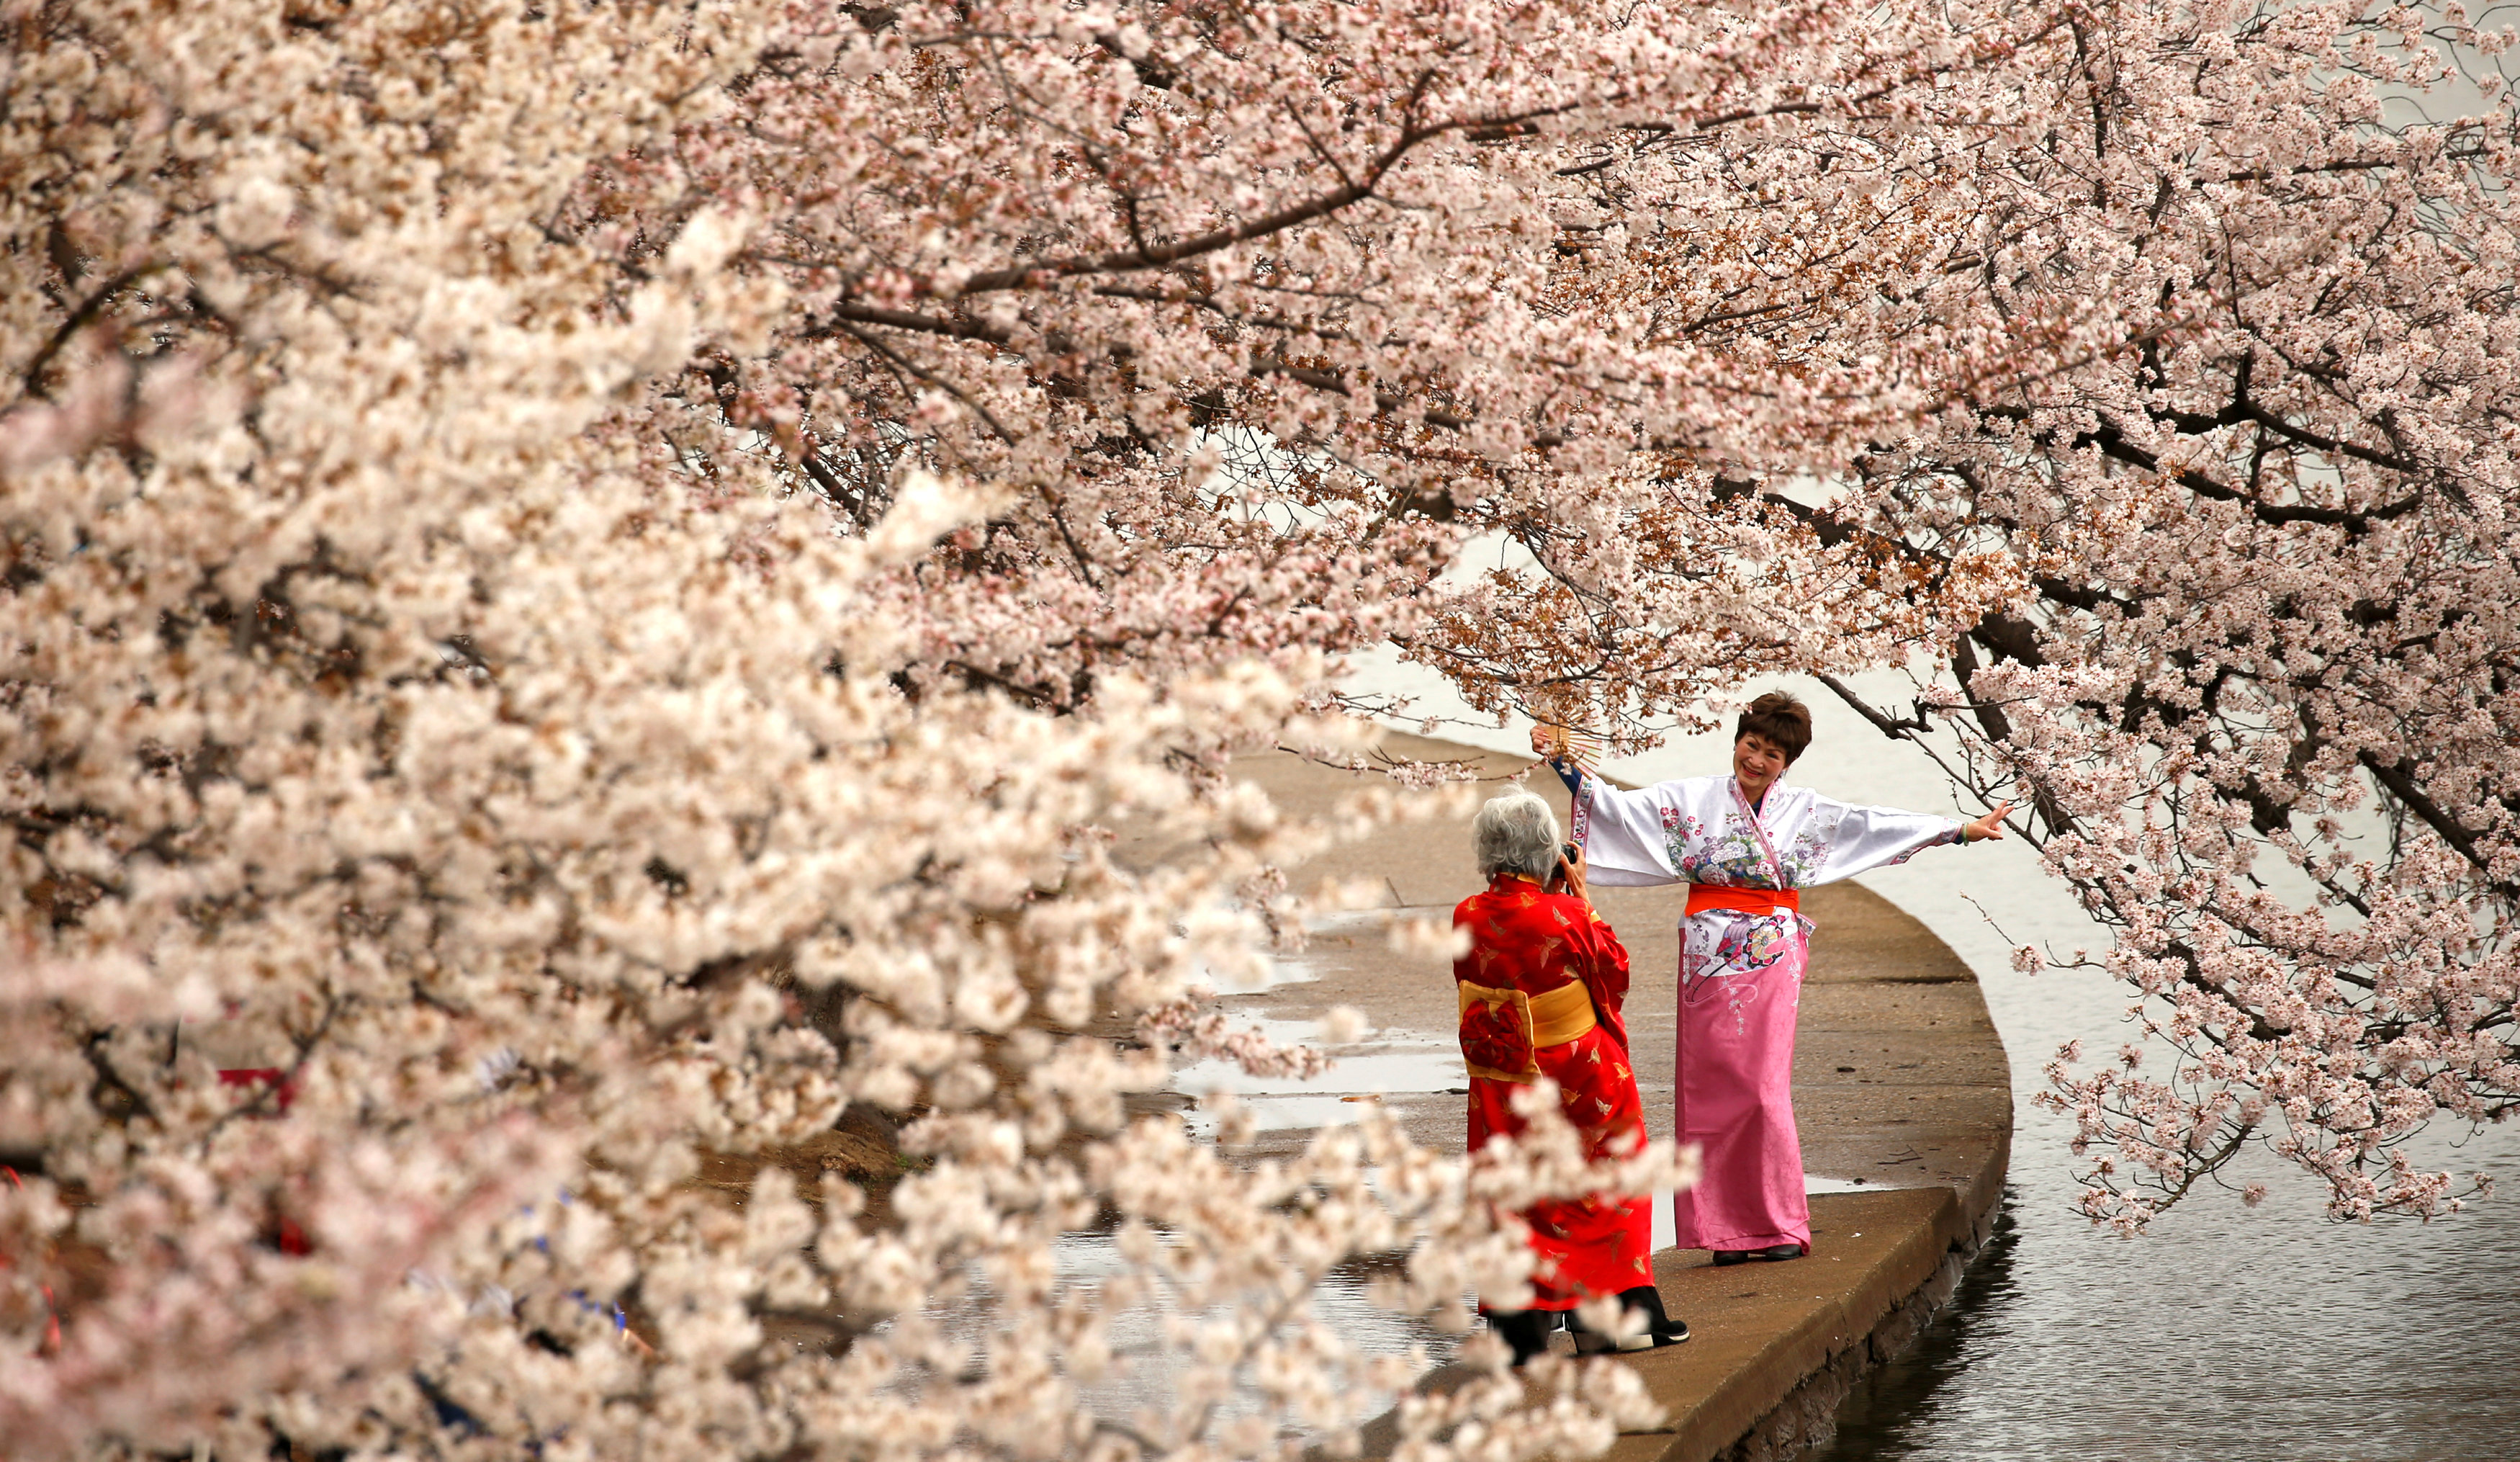 Women in kimonos take photos under the cherry blossoms along the Tidal Basin on a misty morning in Washington, US. PHOTO: REUTERS